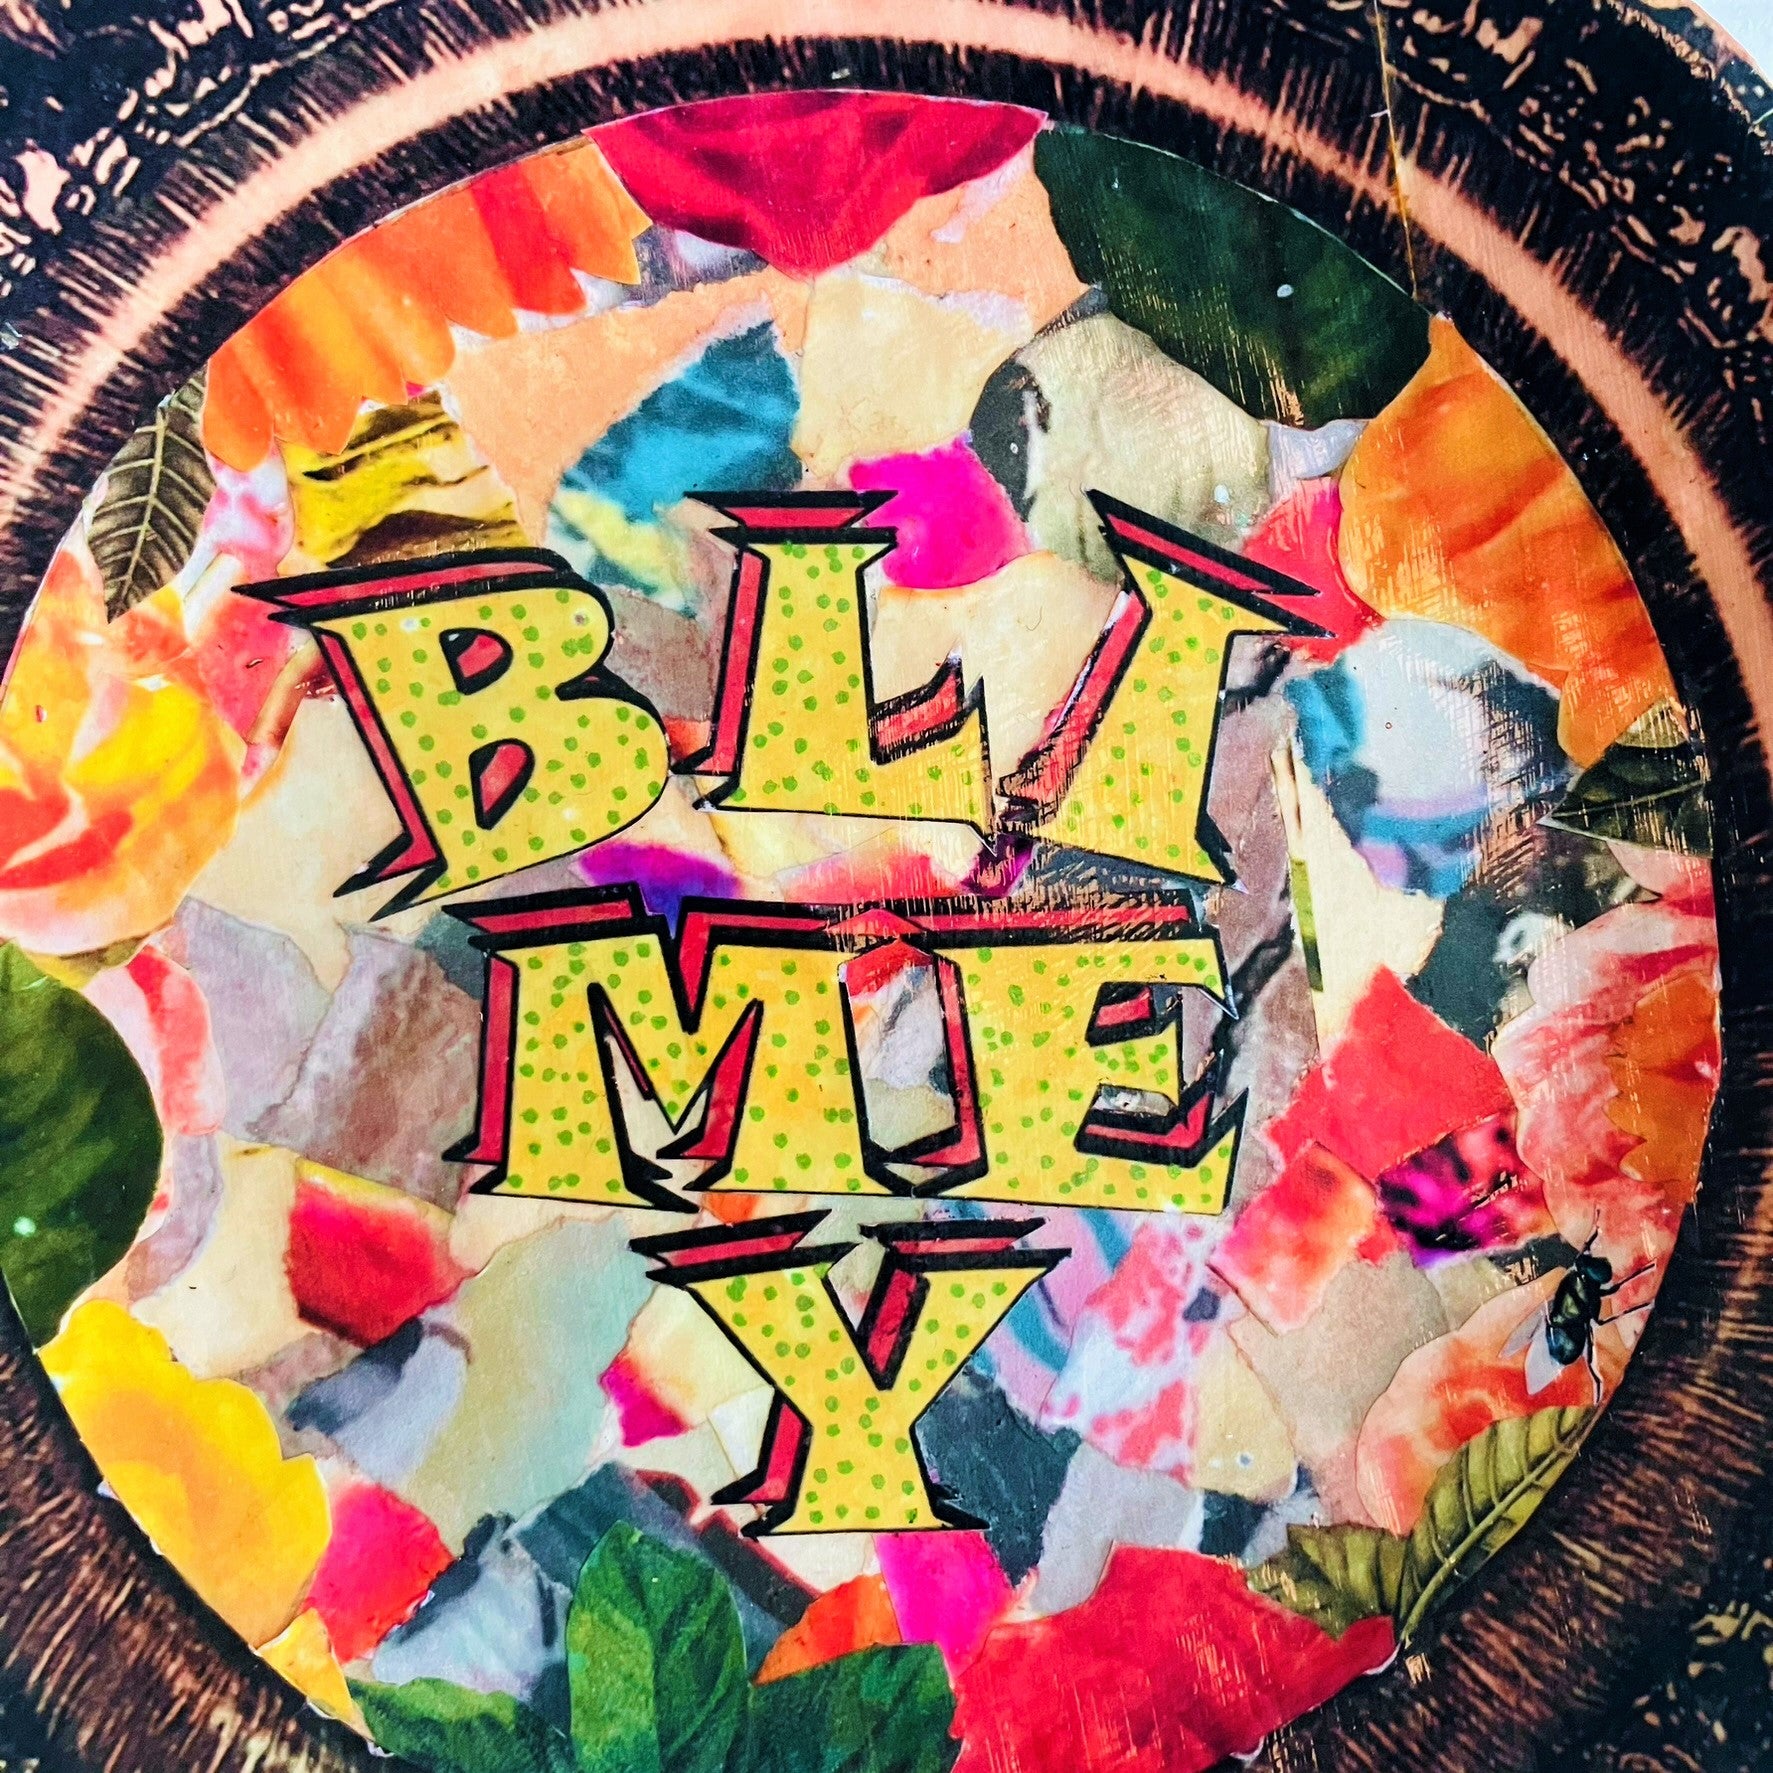 "Blimey" Wall Plate by House of Frisson, featuring a collage of word "blimey" framed with a vintage looking frame, with colourful background. Closeup detail showing the word "blimey".